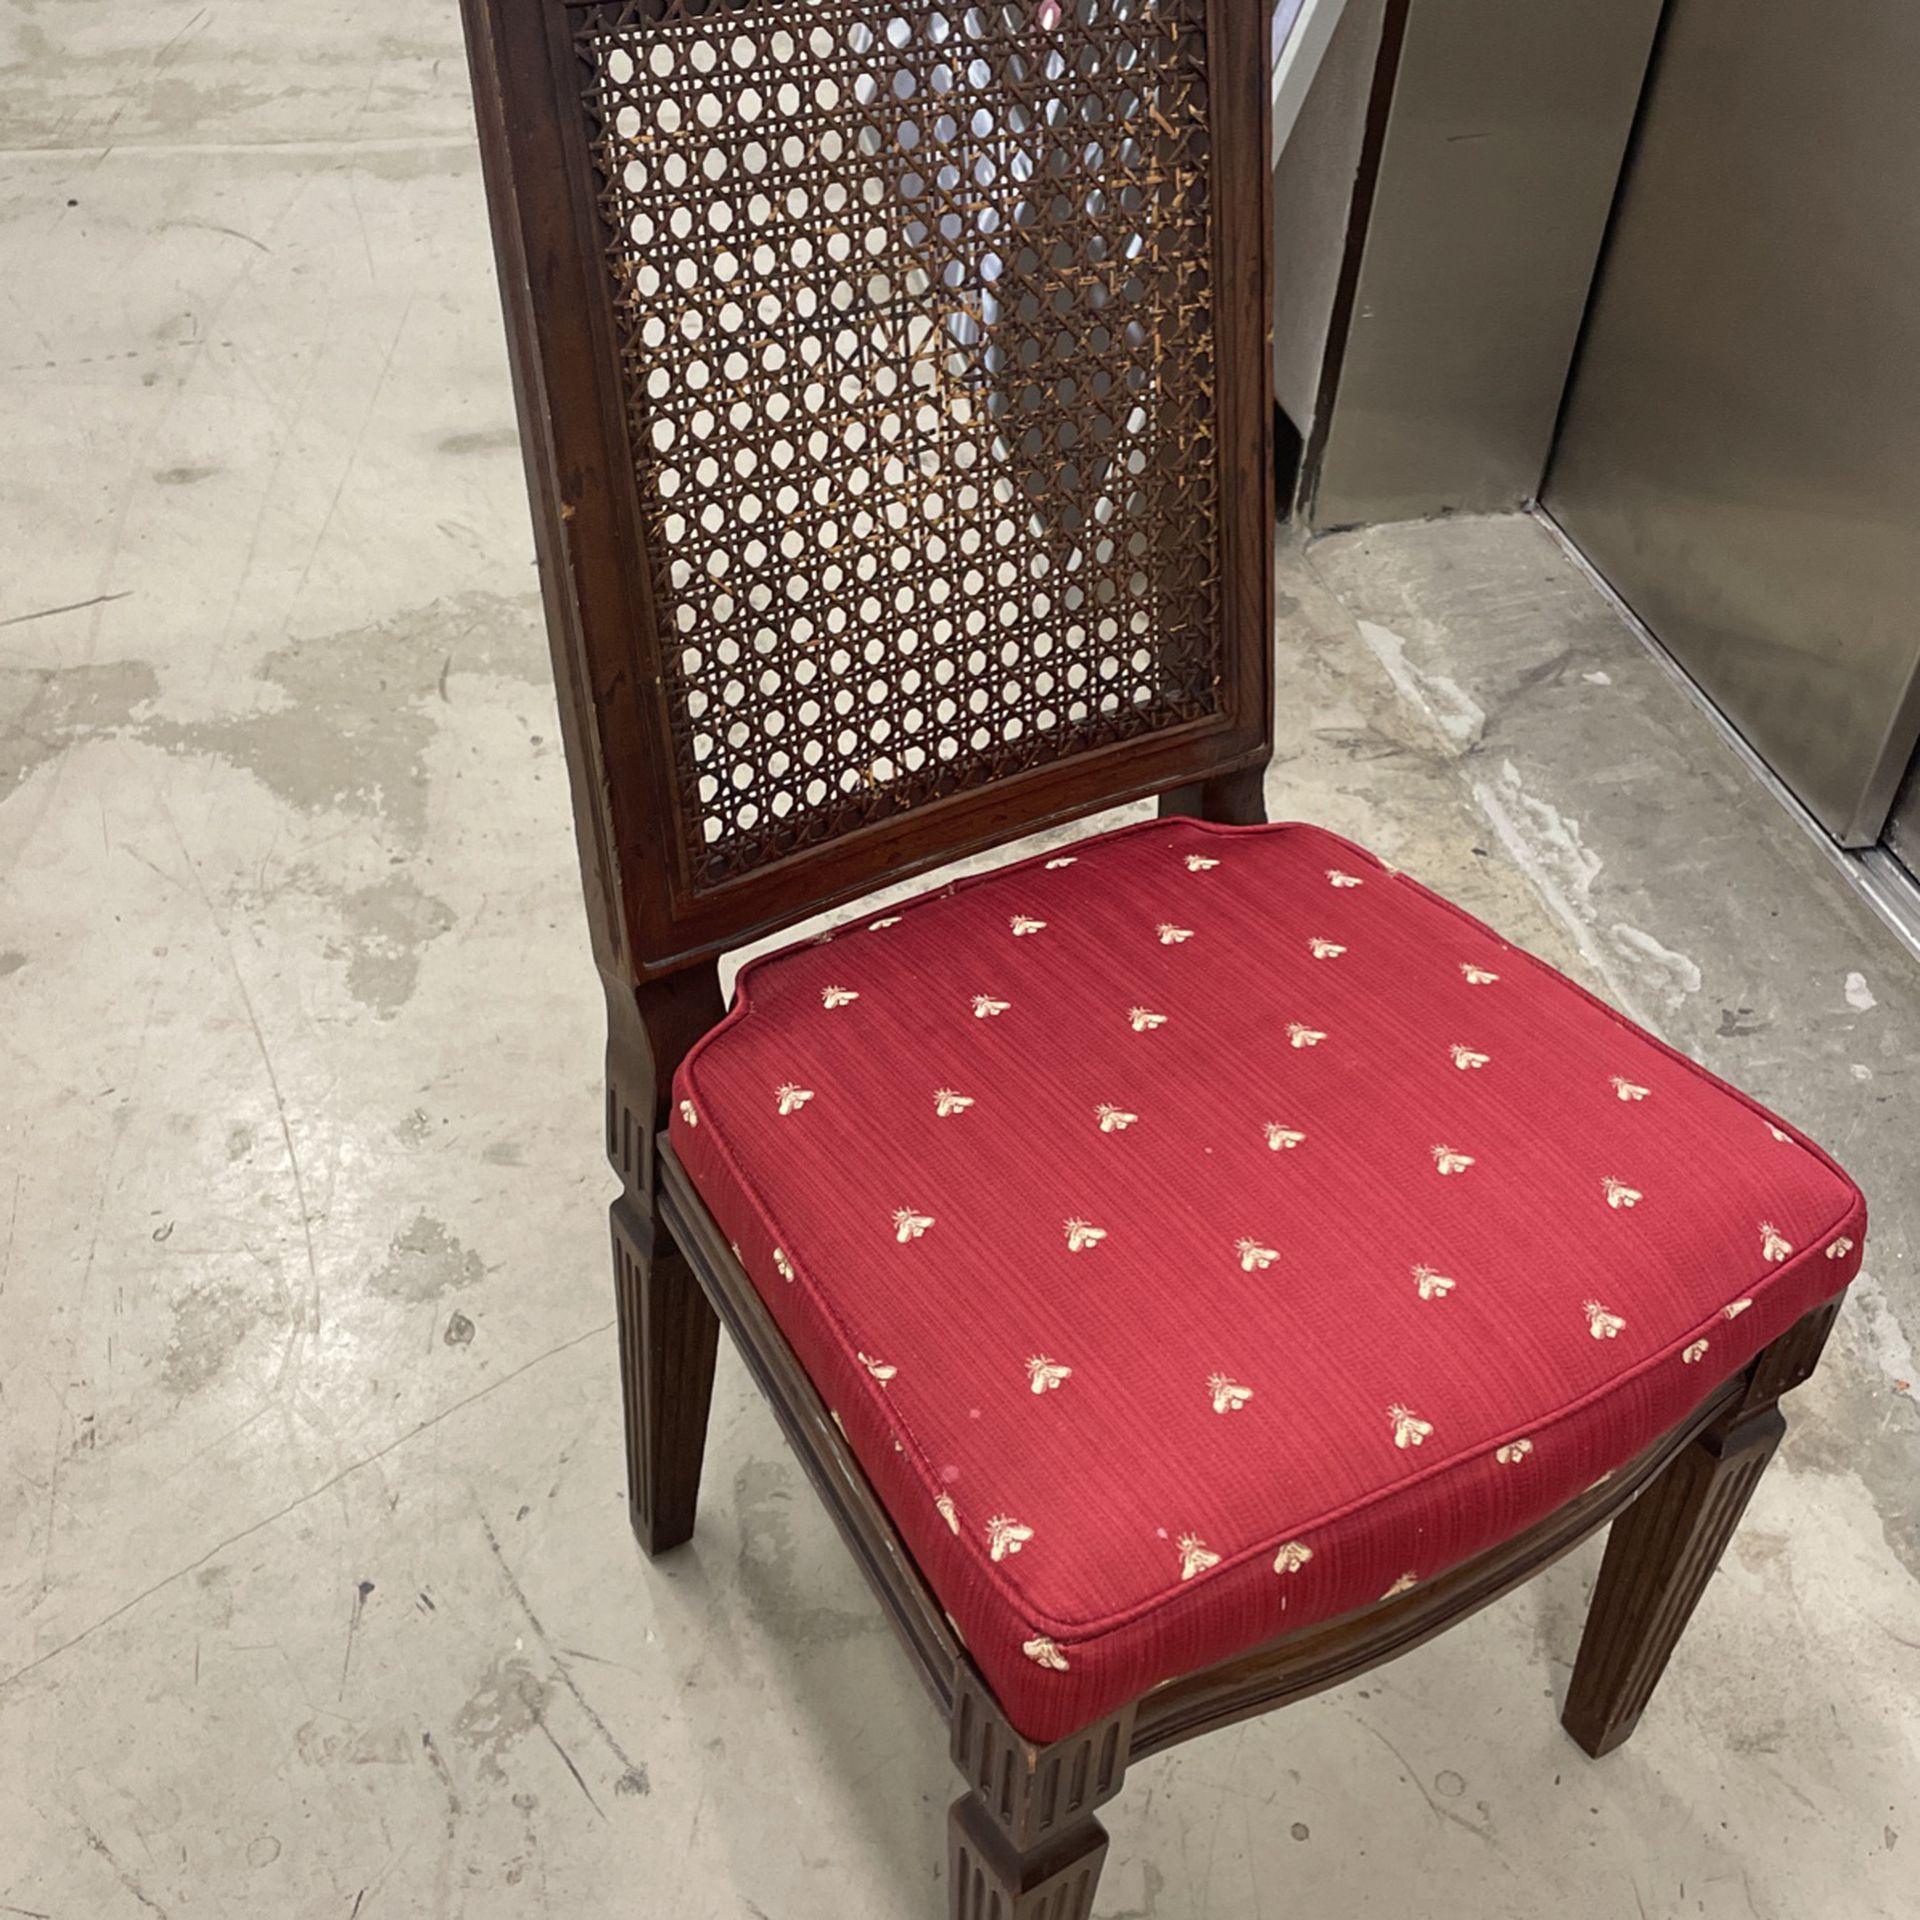 Solid Wood Vintage Cane Back Chair For $50 Delivery Is Included In The Price